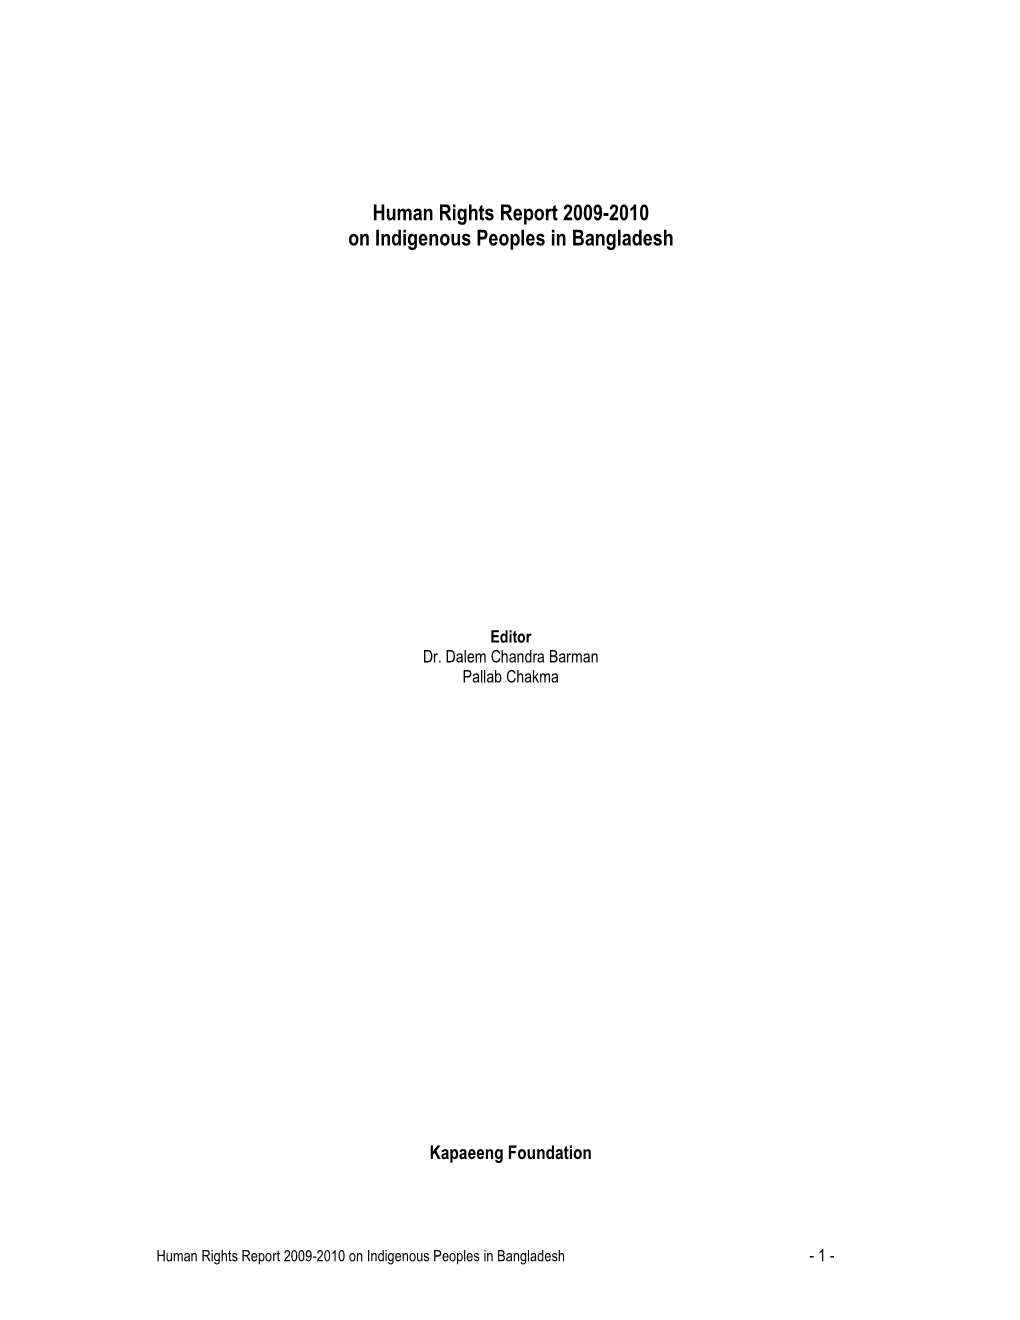 Human Rights Report 2009-2010 on Indigenous Peoples in Bangladesh